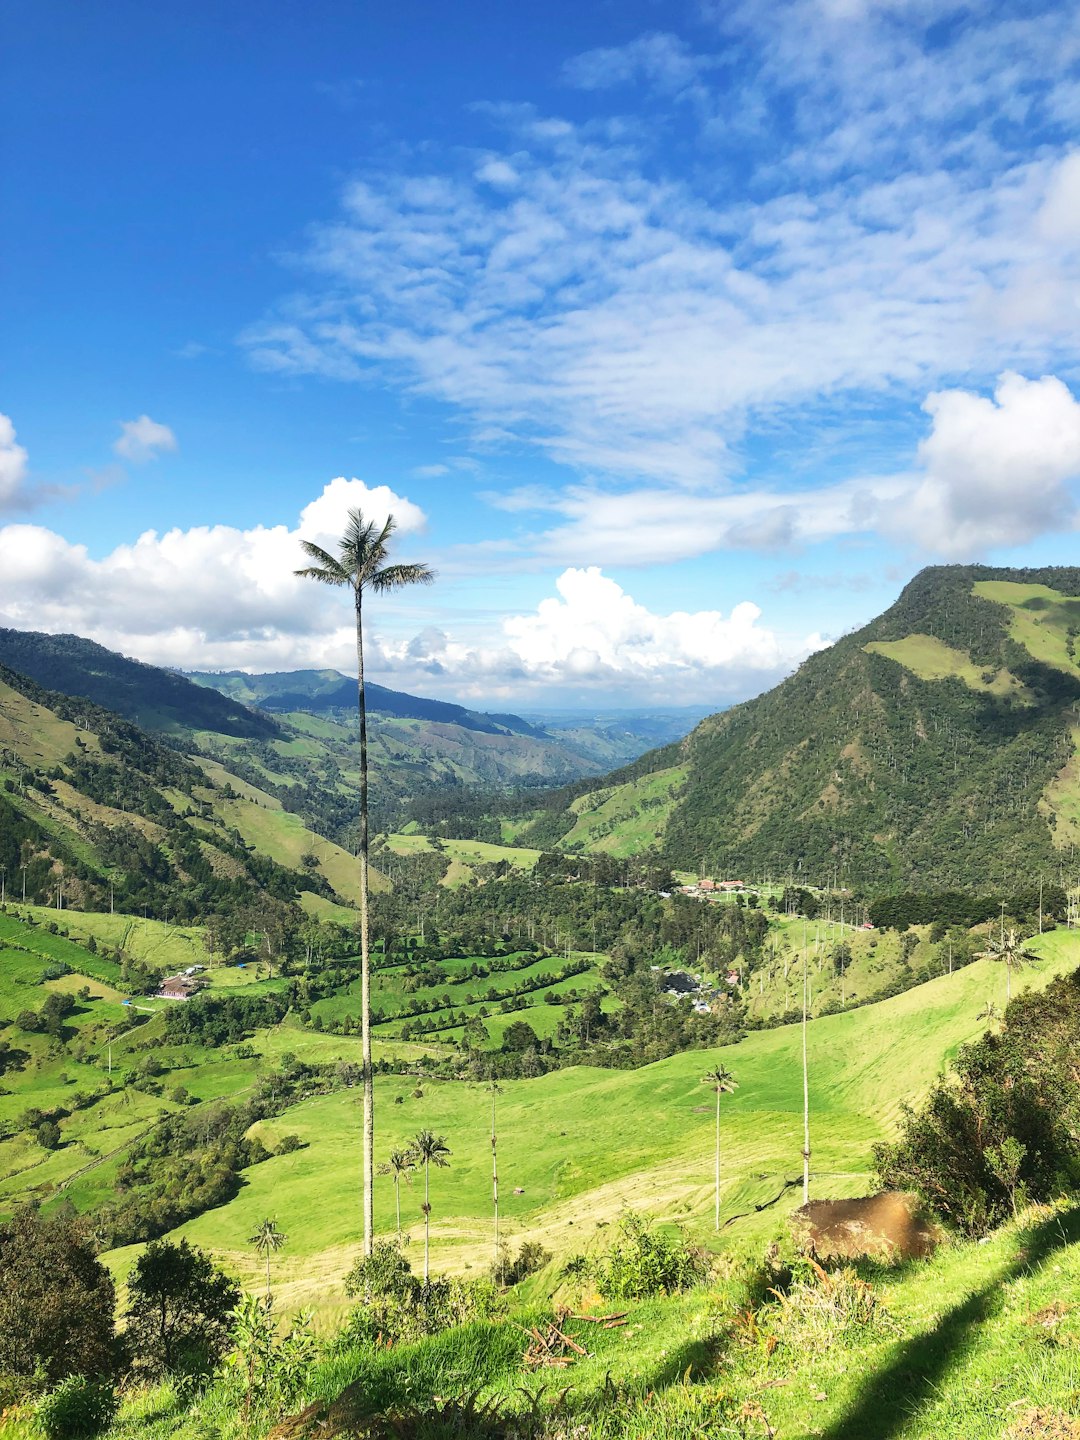 Hill station photo spot Cocora Colombia